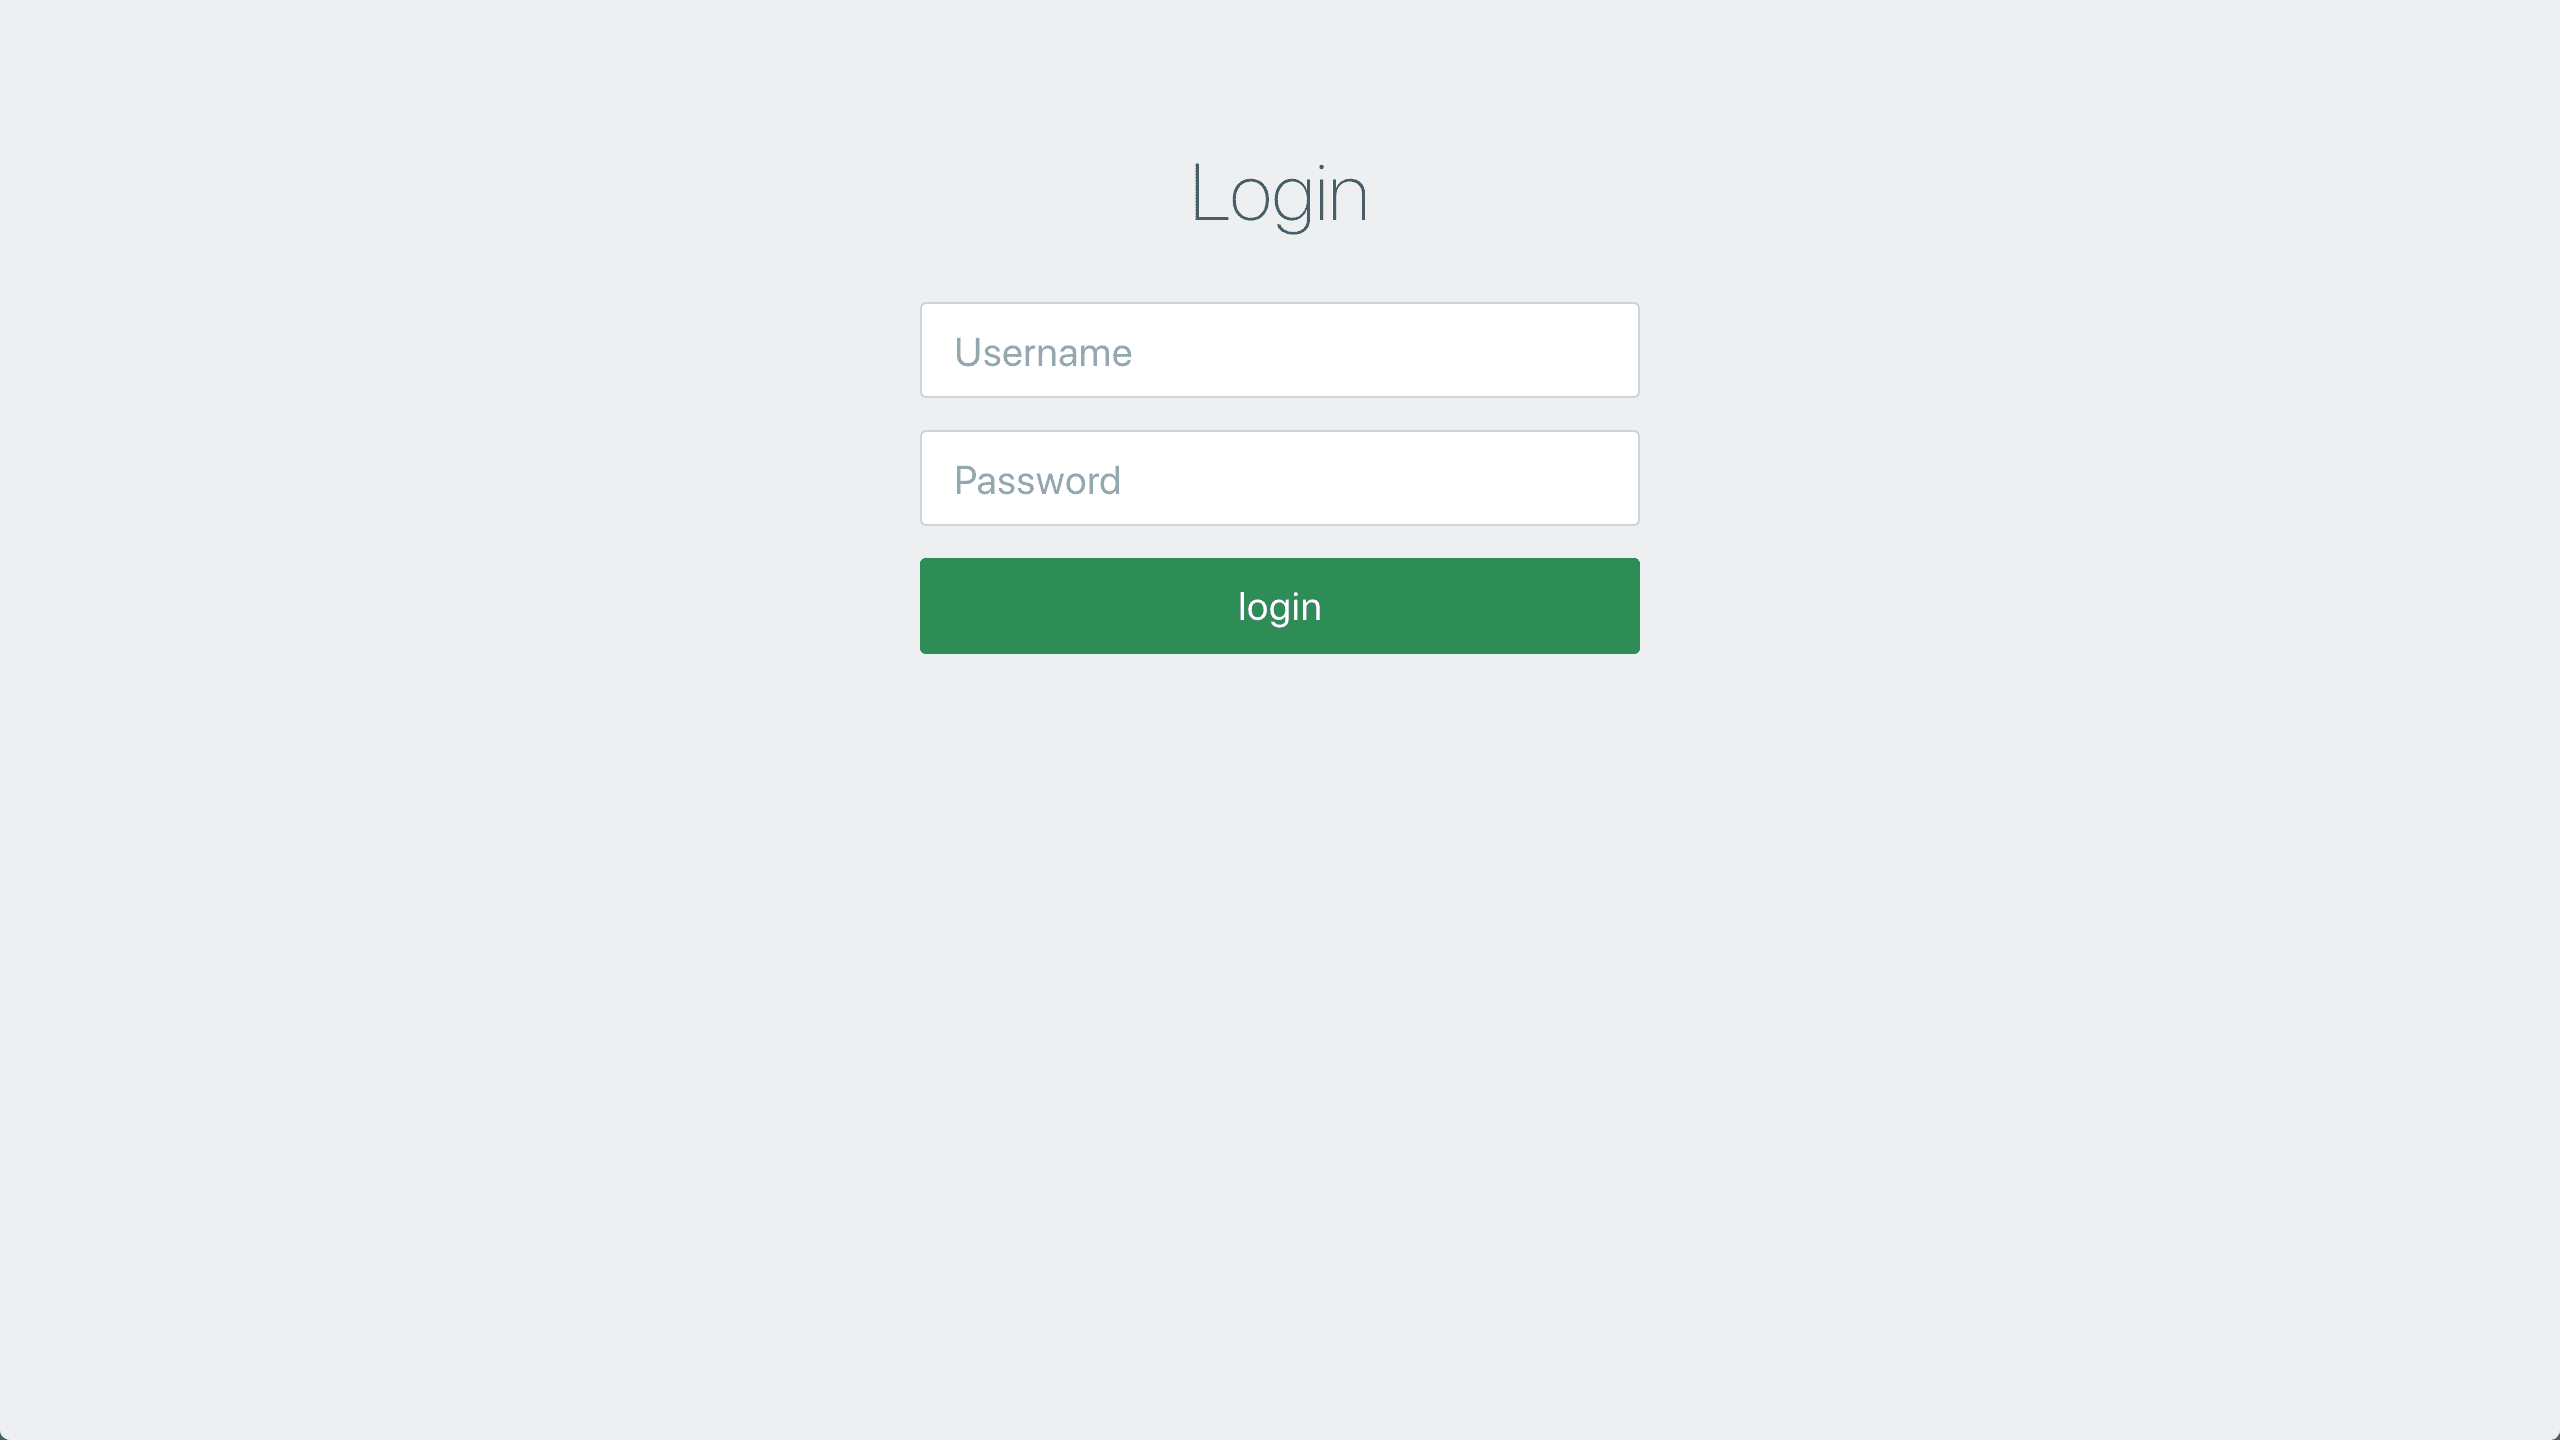 Optional login to limit access.